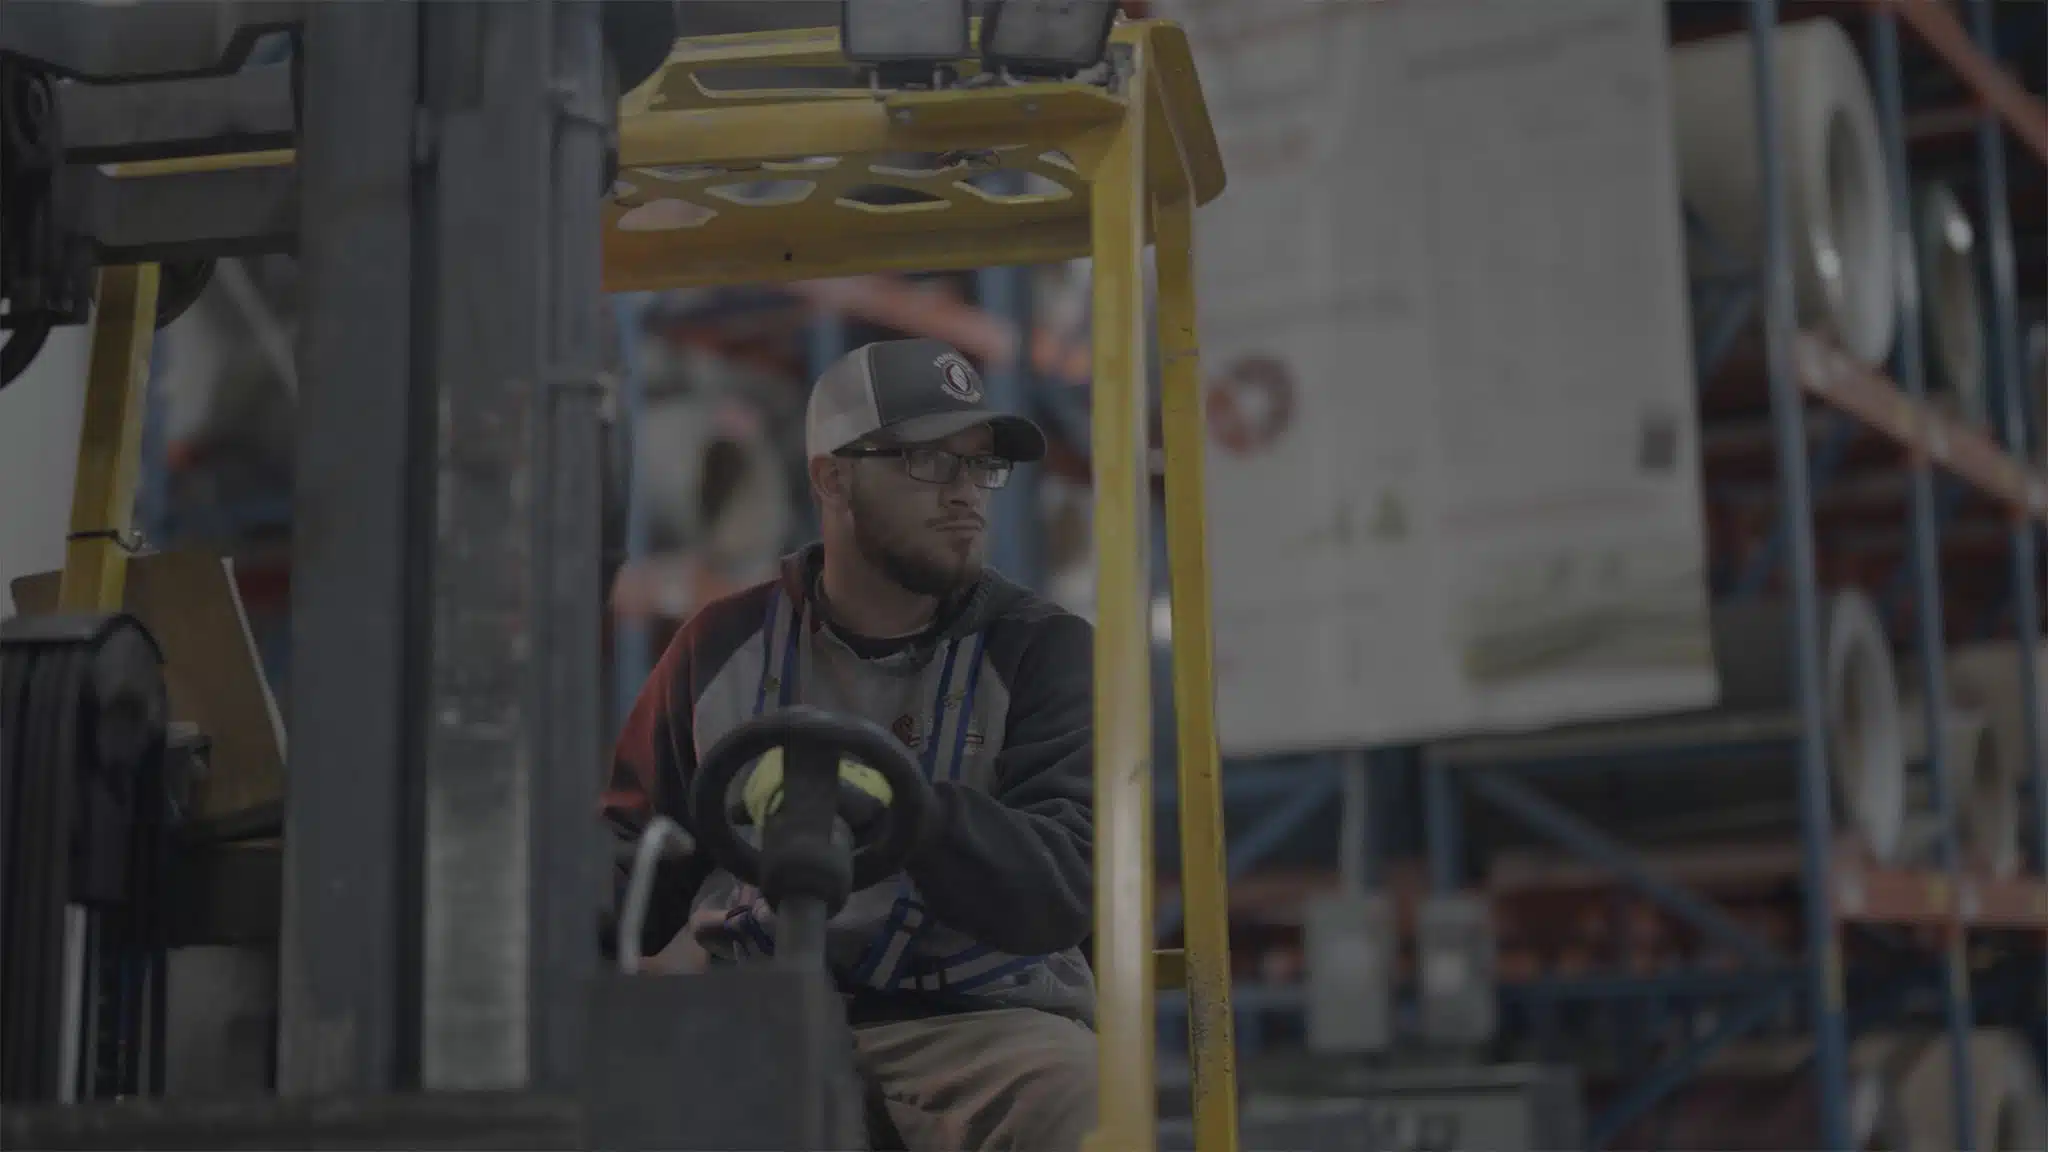 man driving a forklift